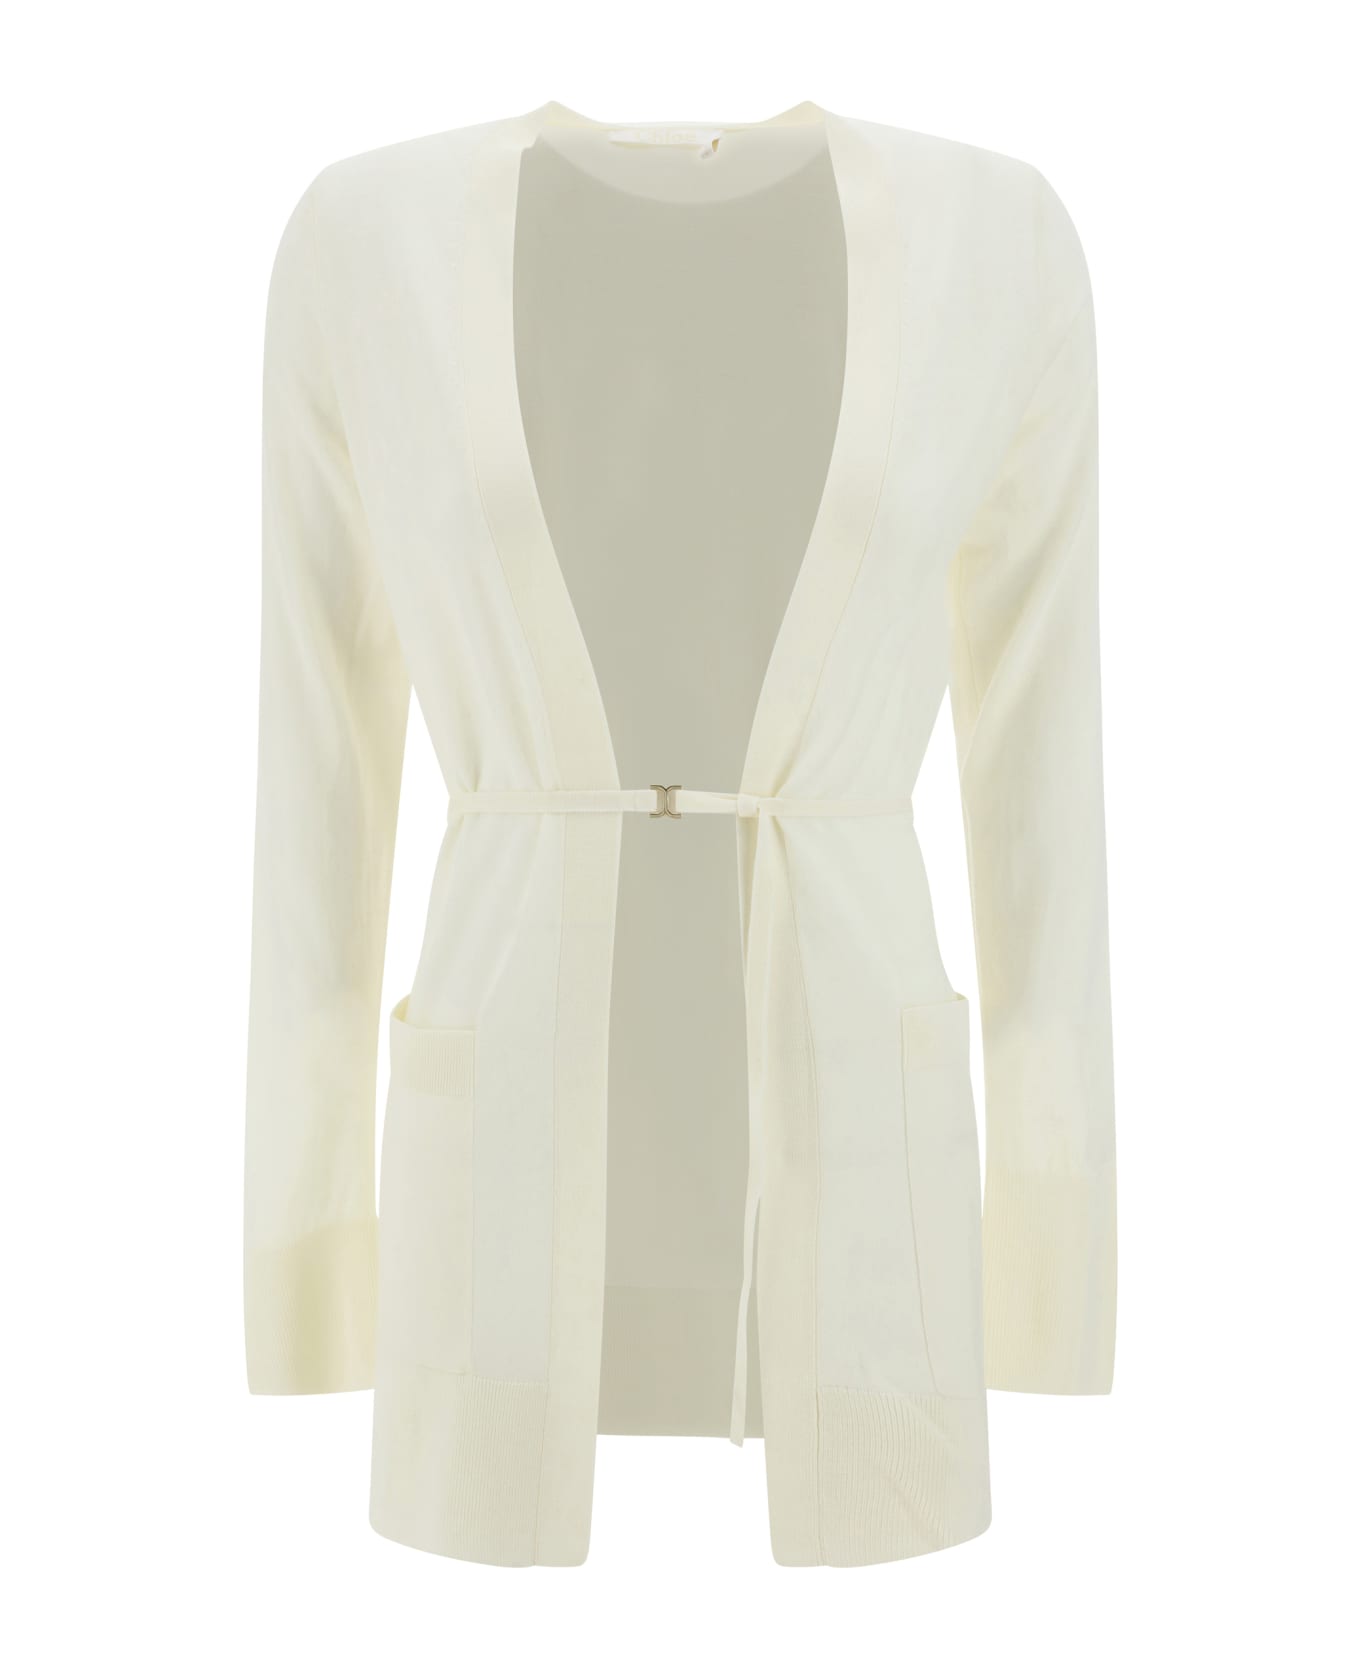 Chloé Knitted Cardigan - Iconic Milk